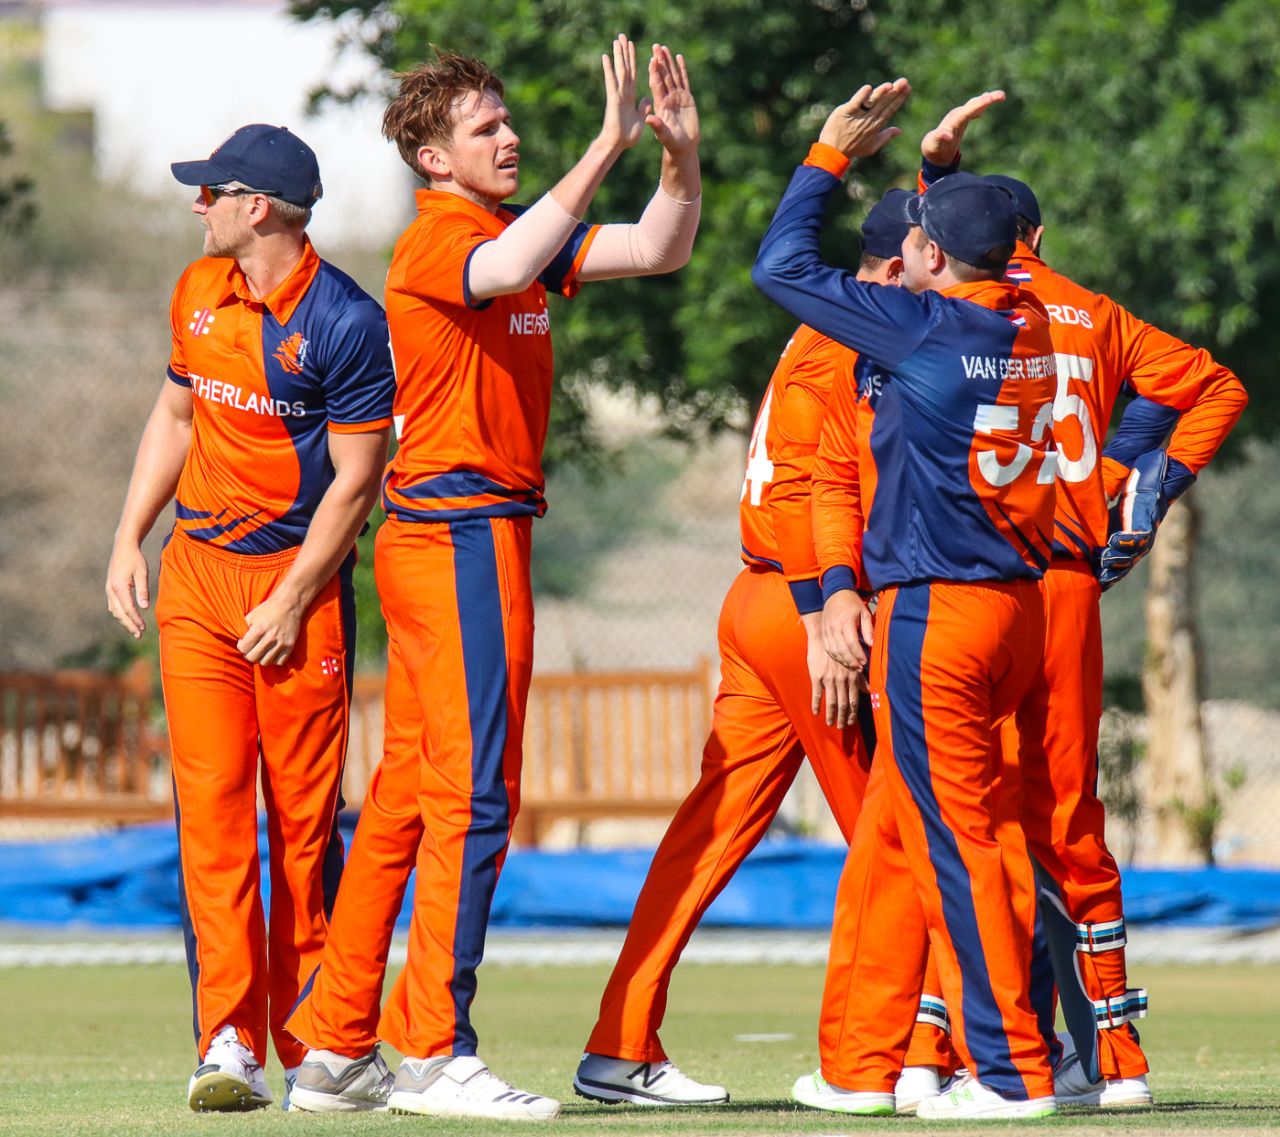 Fred Klaassen gets a round of high fives after his first wicket of the day, Netherlands v Scotland, Oman Quadrangular T20I Series, Al Amerat, February 13, 2019